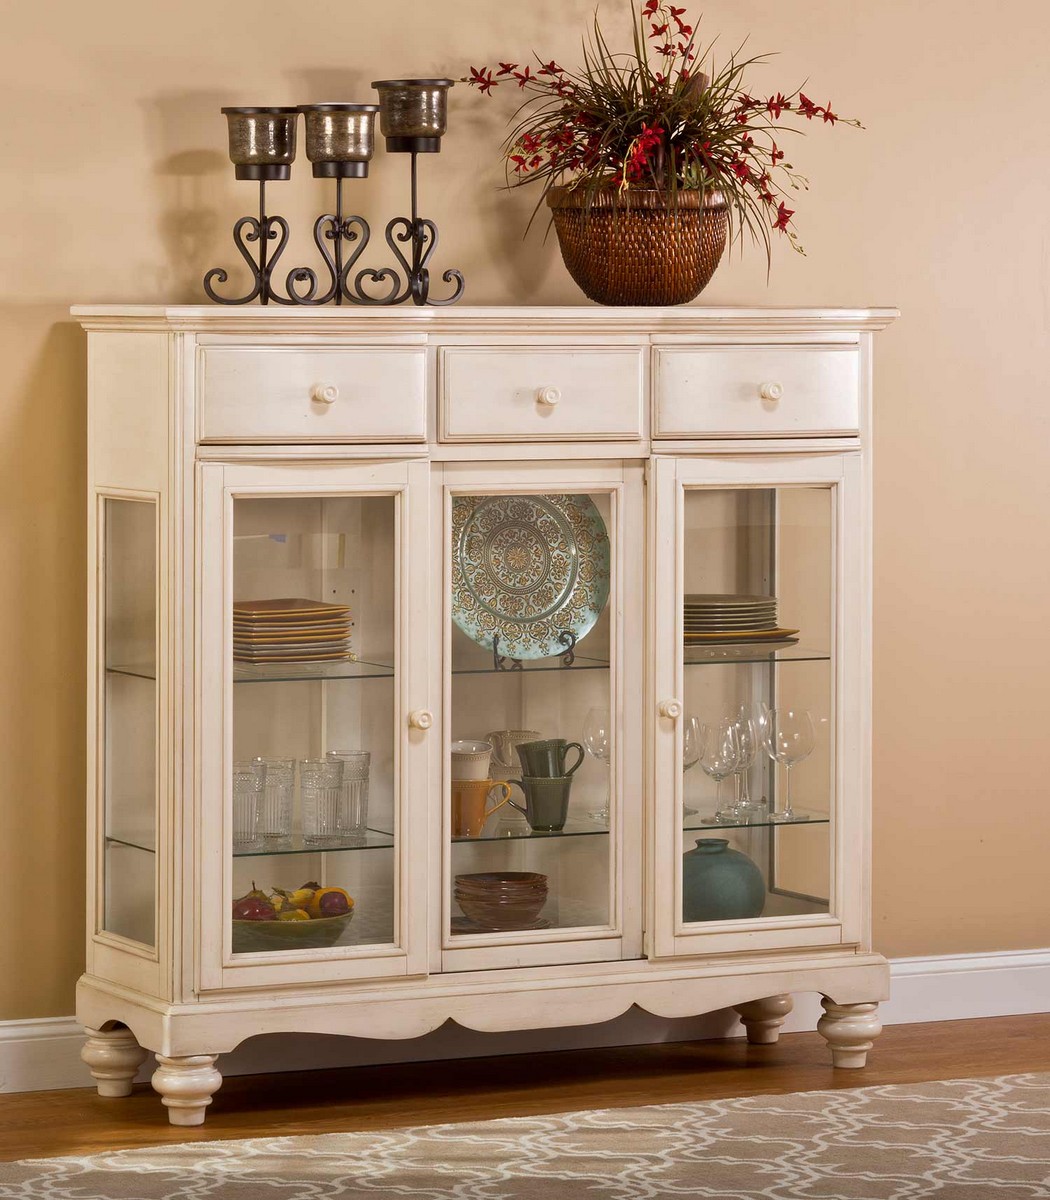 Hillsdale Pine Island Tall Buffet - Old White